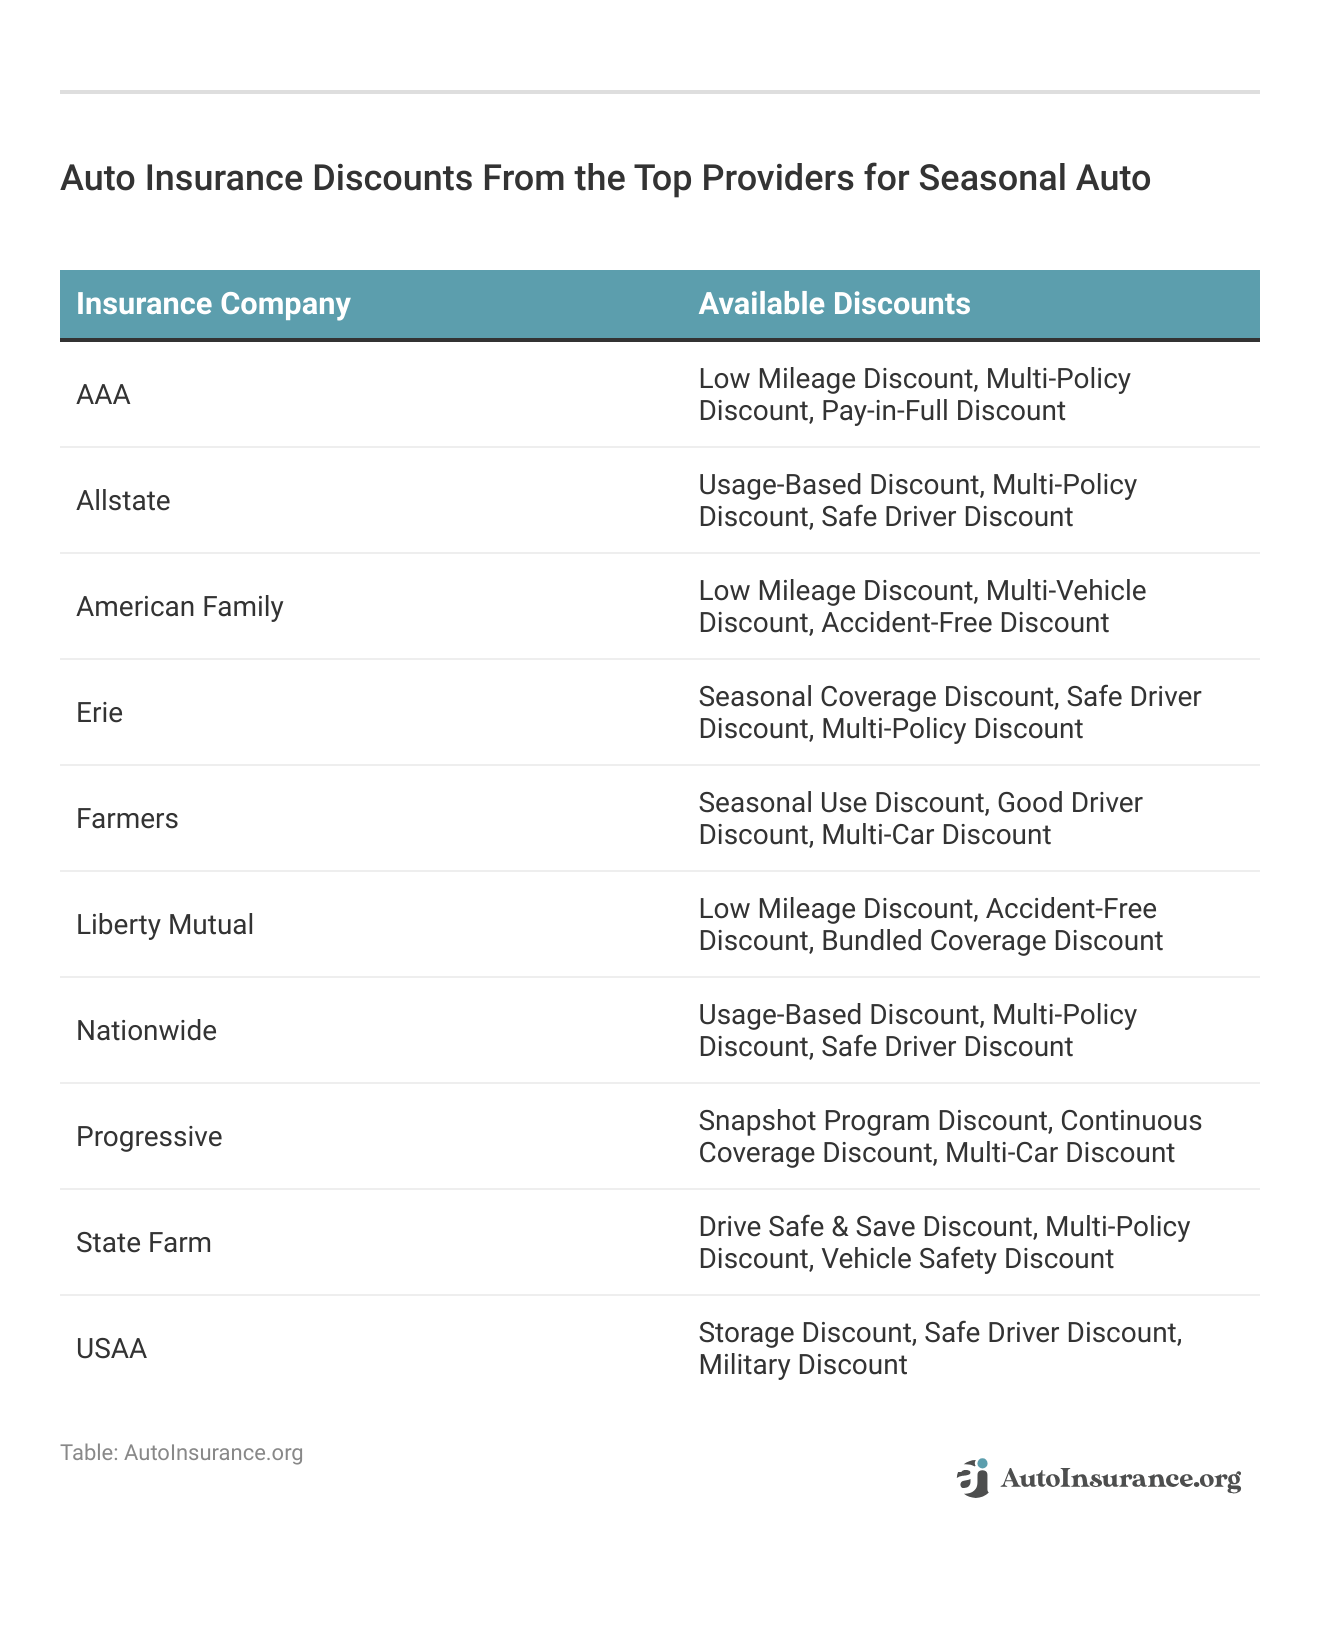 <h3>Auto Insurance Discounts From the Top Providers for Seasonal Auto</h3>